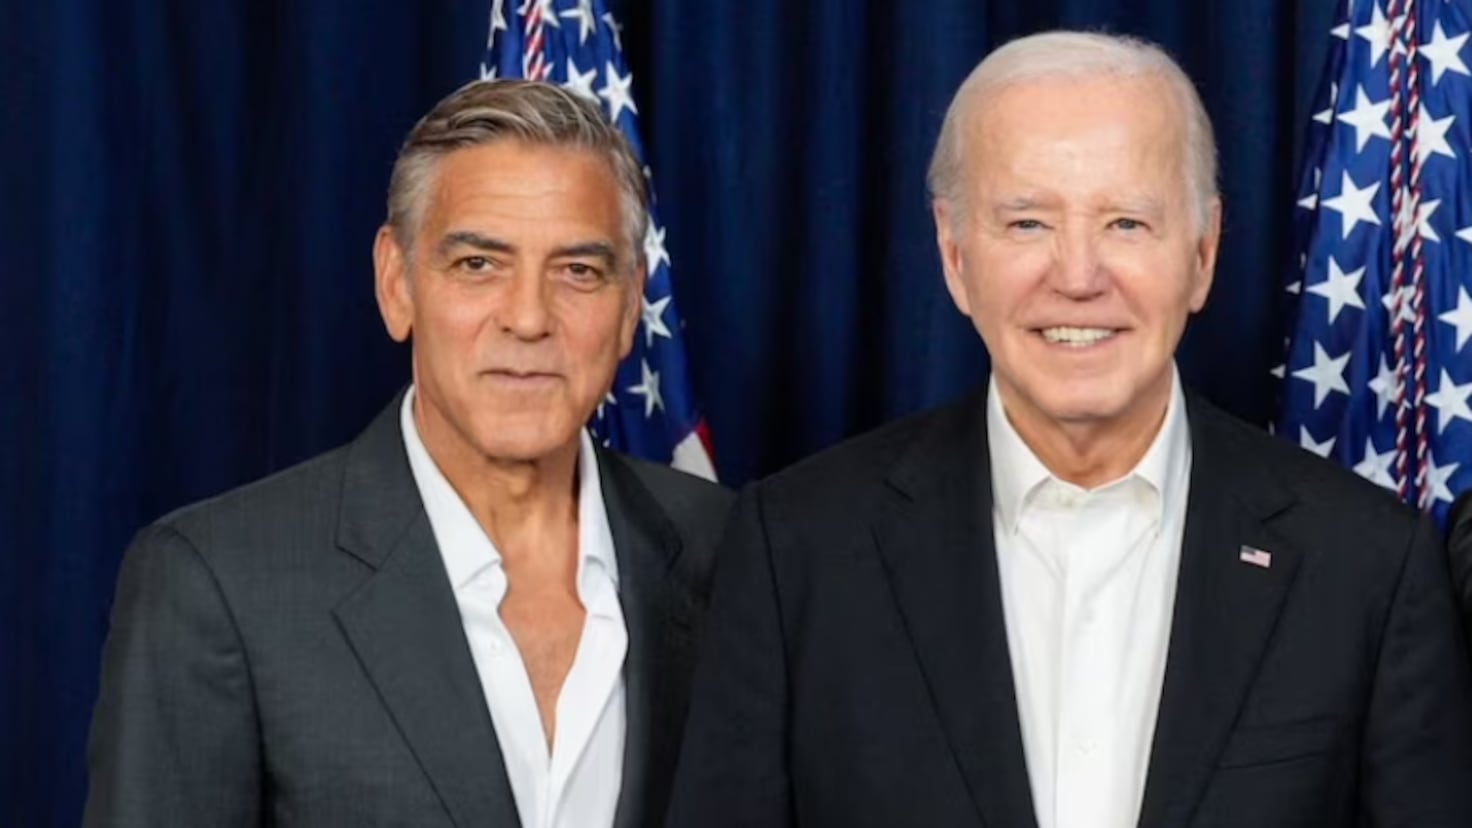 George Clooney calls for Joe Biden to step down: We're not going to win in November with this president